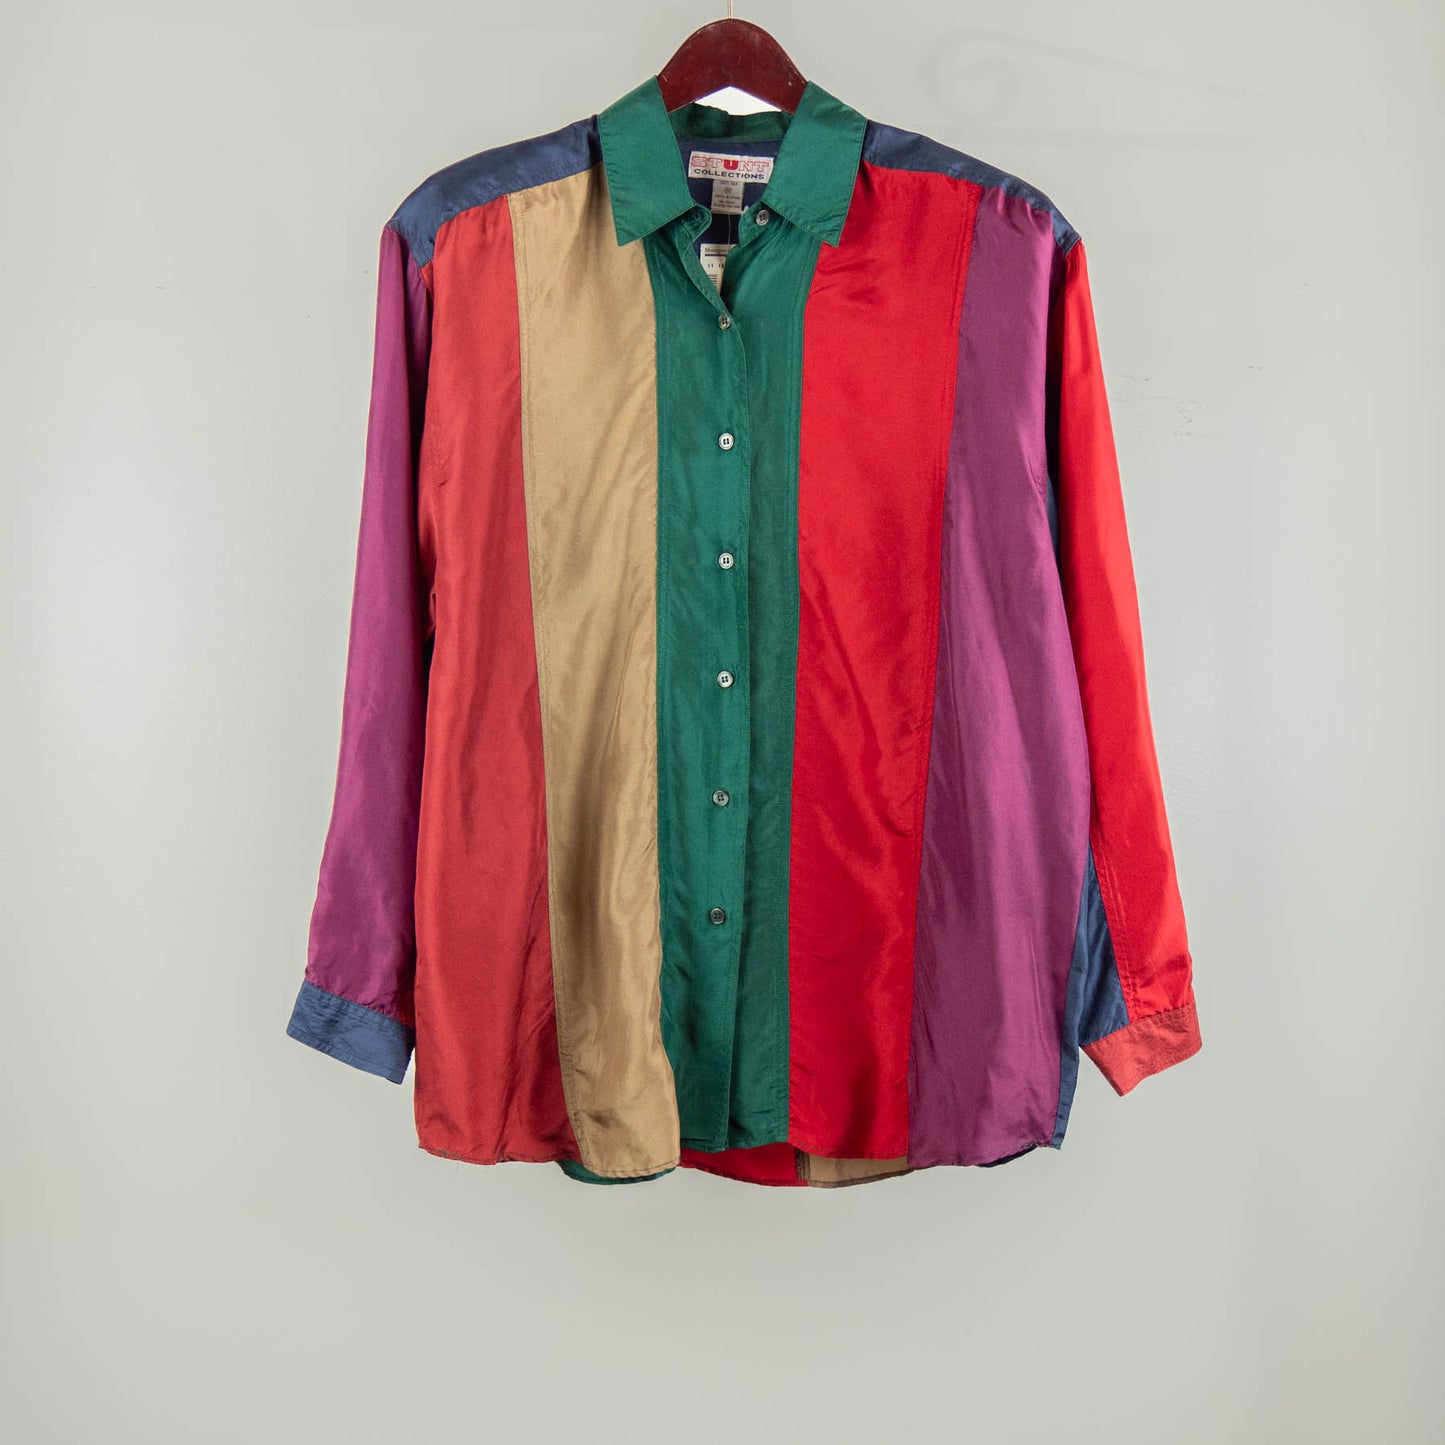 Classchic Couture - Stunt - Silk L/S Shirts - Green/ Red/ Navy